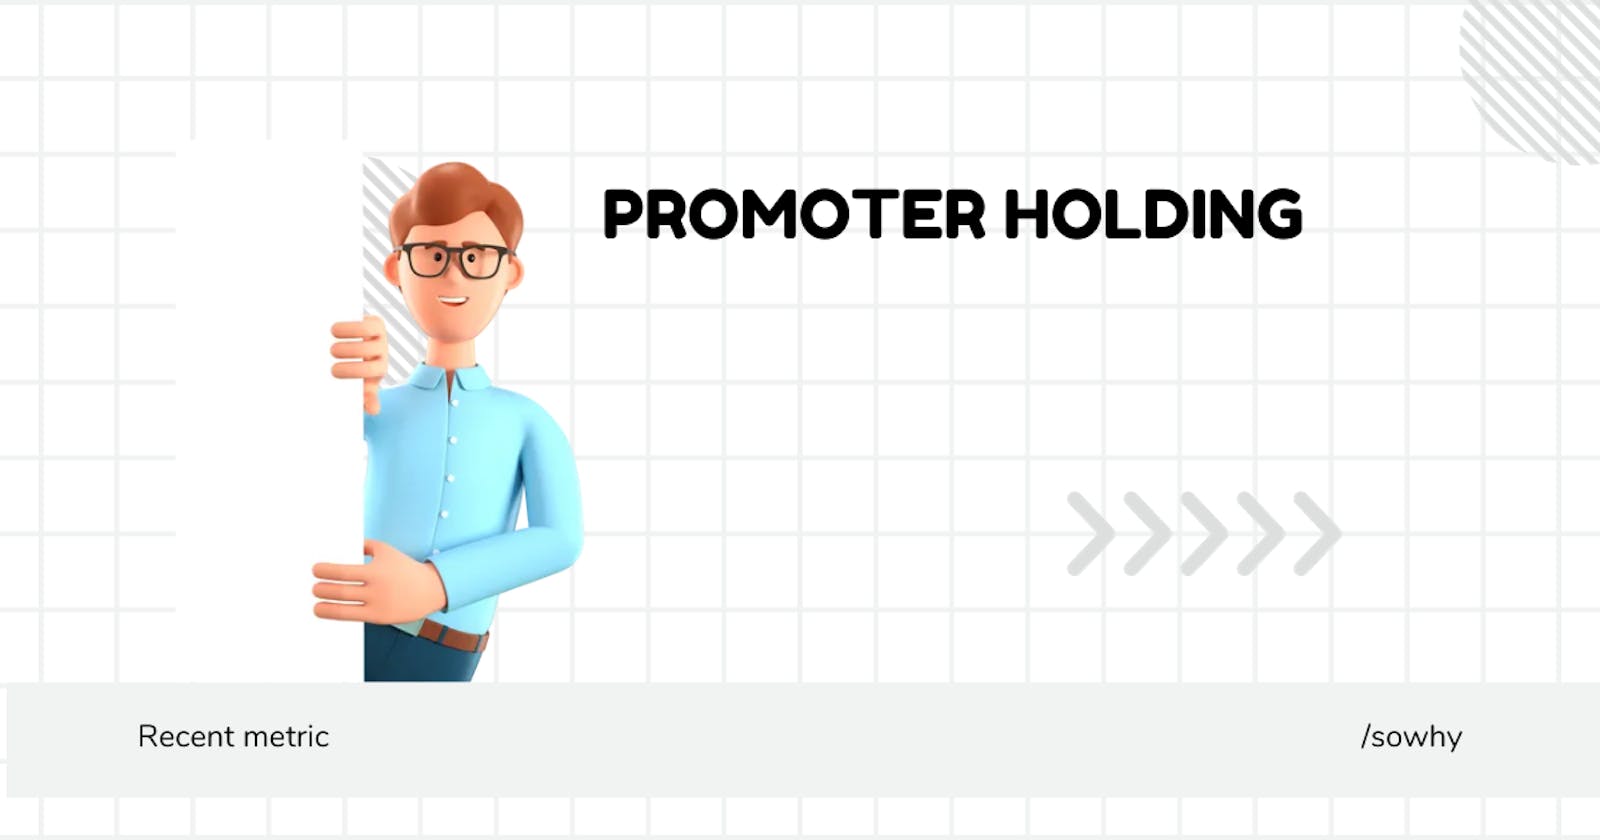 Promoter holding